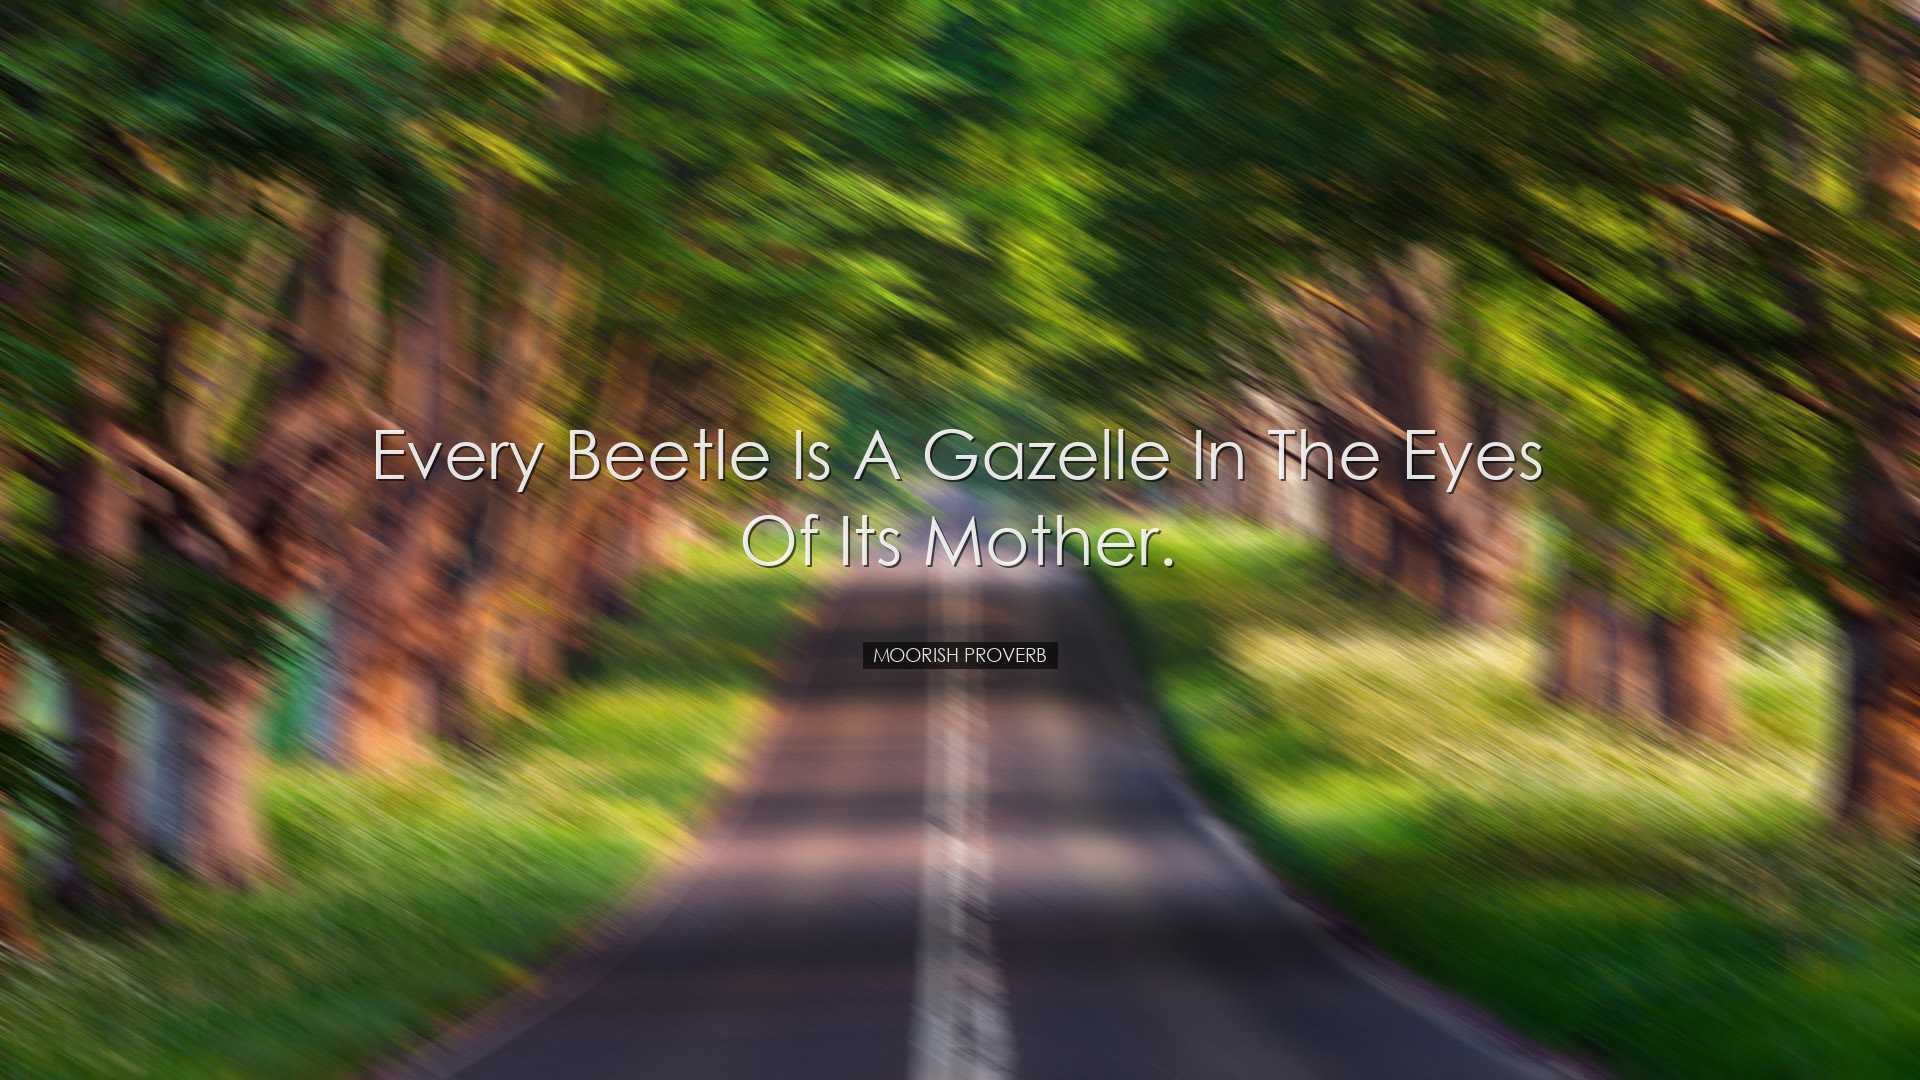 Every beetle is a gazelle in the eyes of its mother. - Moorish Pro